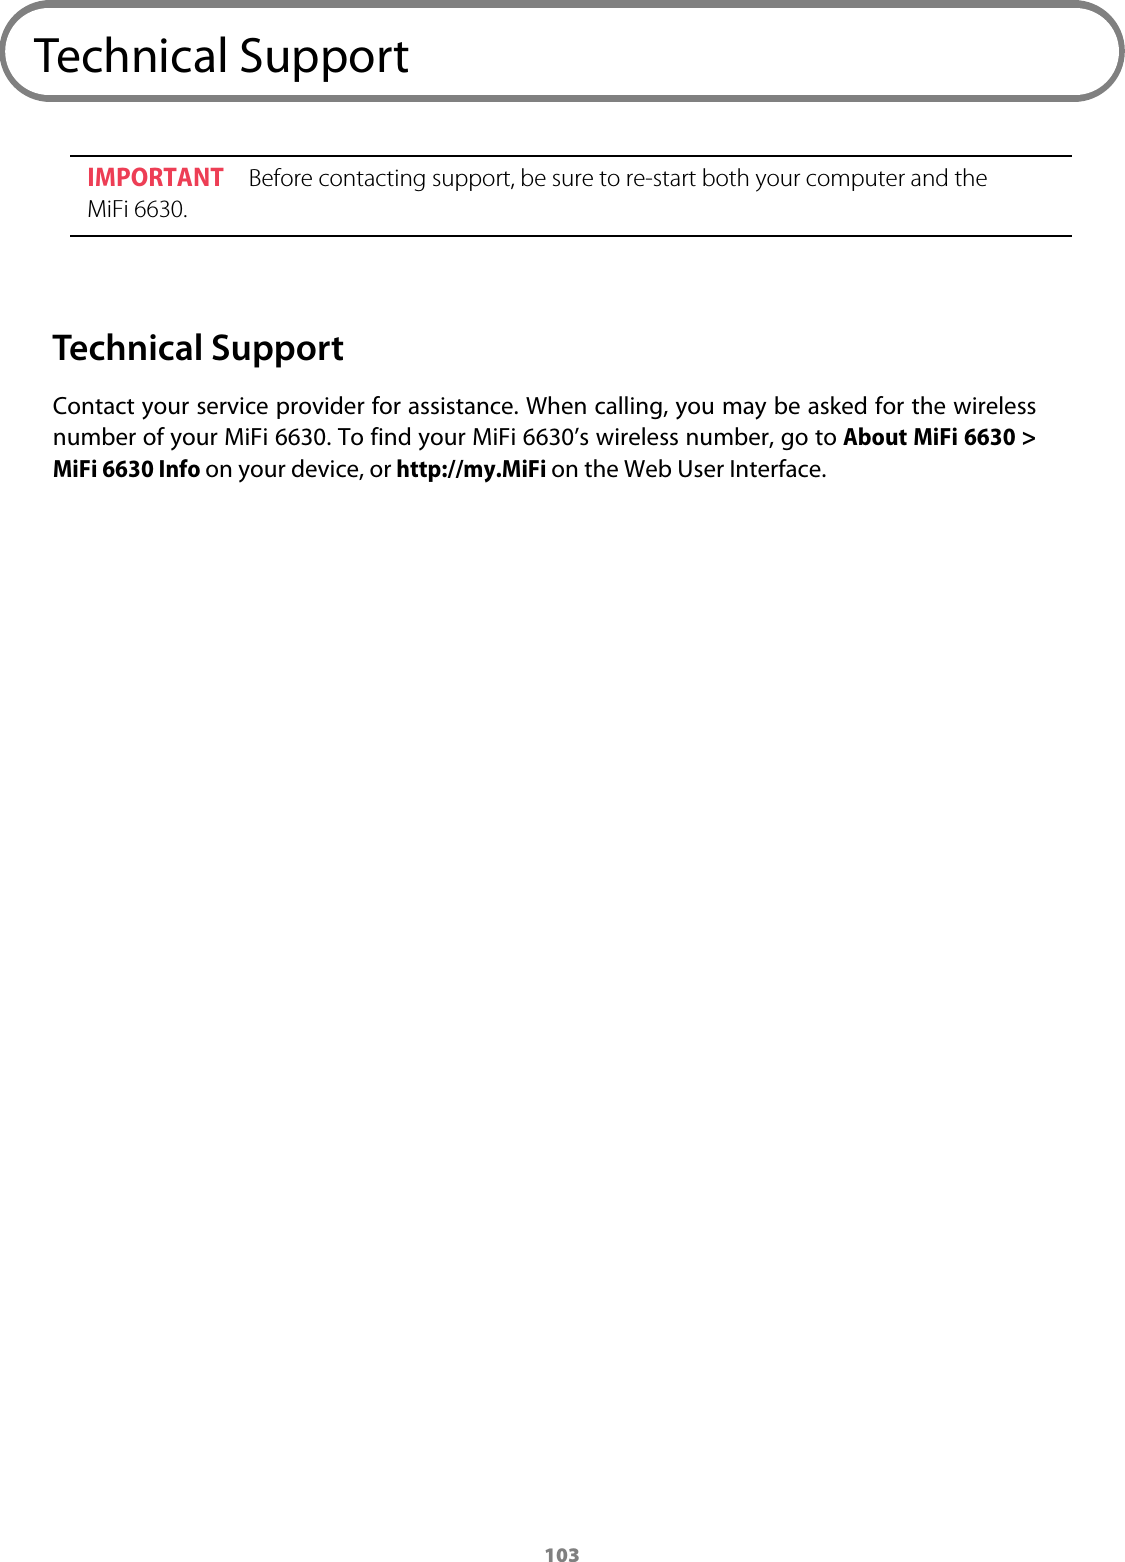 103Technical SupportIMPORTANT Before contacting support, be sure to re-start both your computer and the MiFi 6630.Technical SupportContact your service provider for assistance. When calling, you may be asked for the wireless number of your MiFi 6630. To find your MiFi 6630’s wireless number, go to About MiFi 6630 &gt; MiFi 6630 Info on your device, or http://my.MiFi on the Web User Interface.